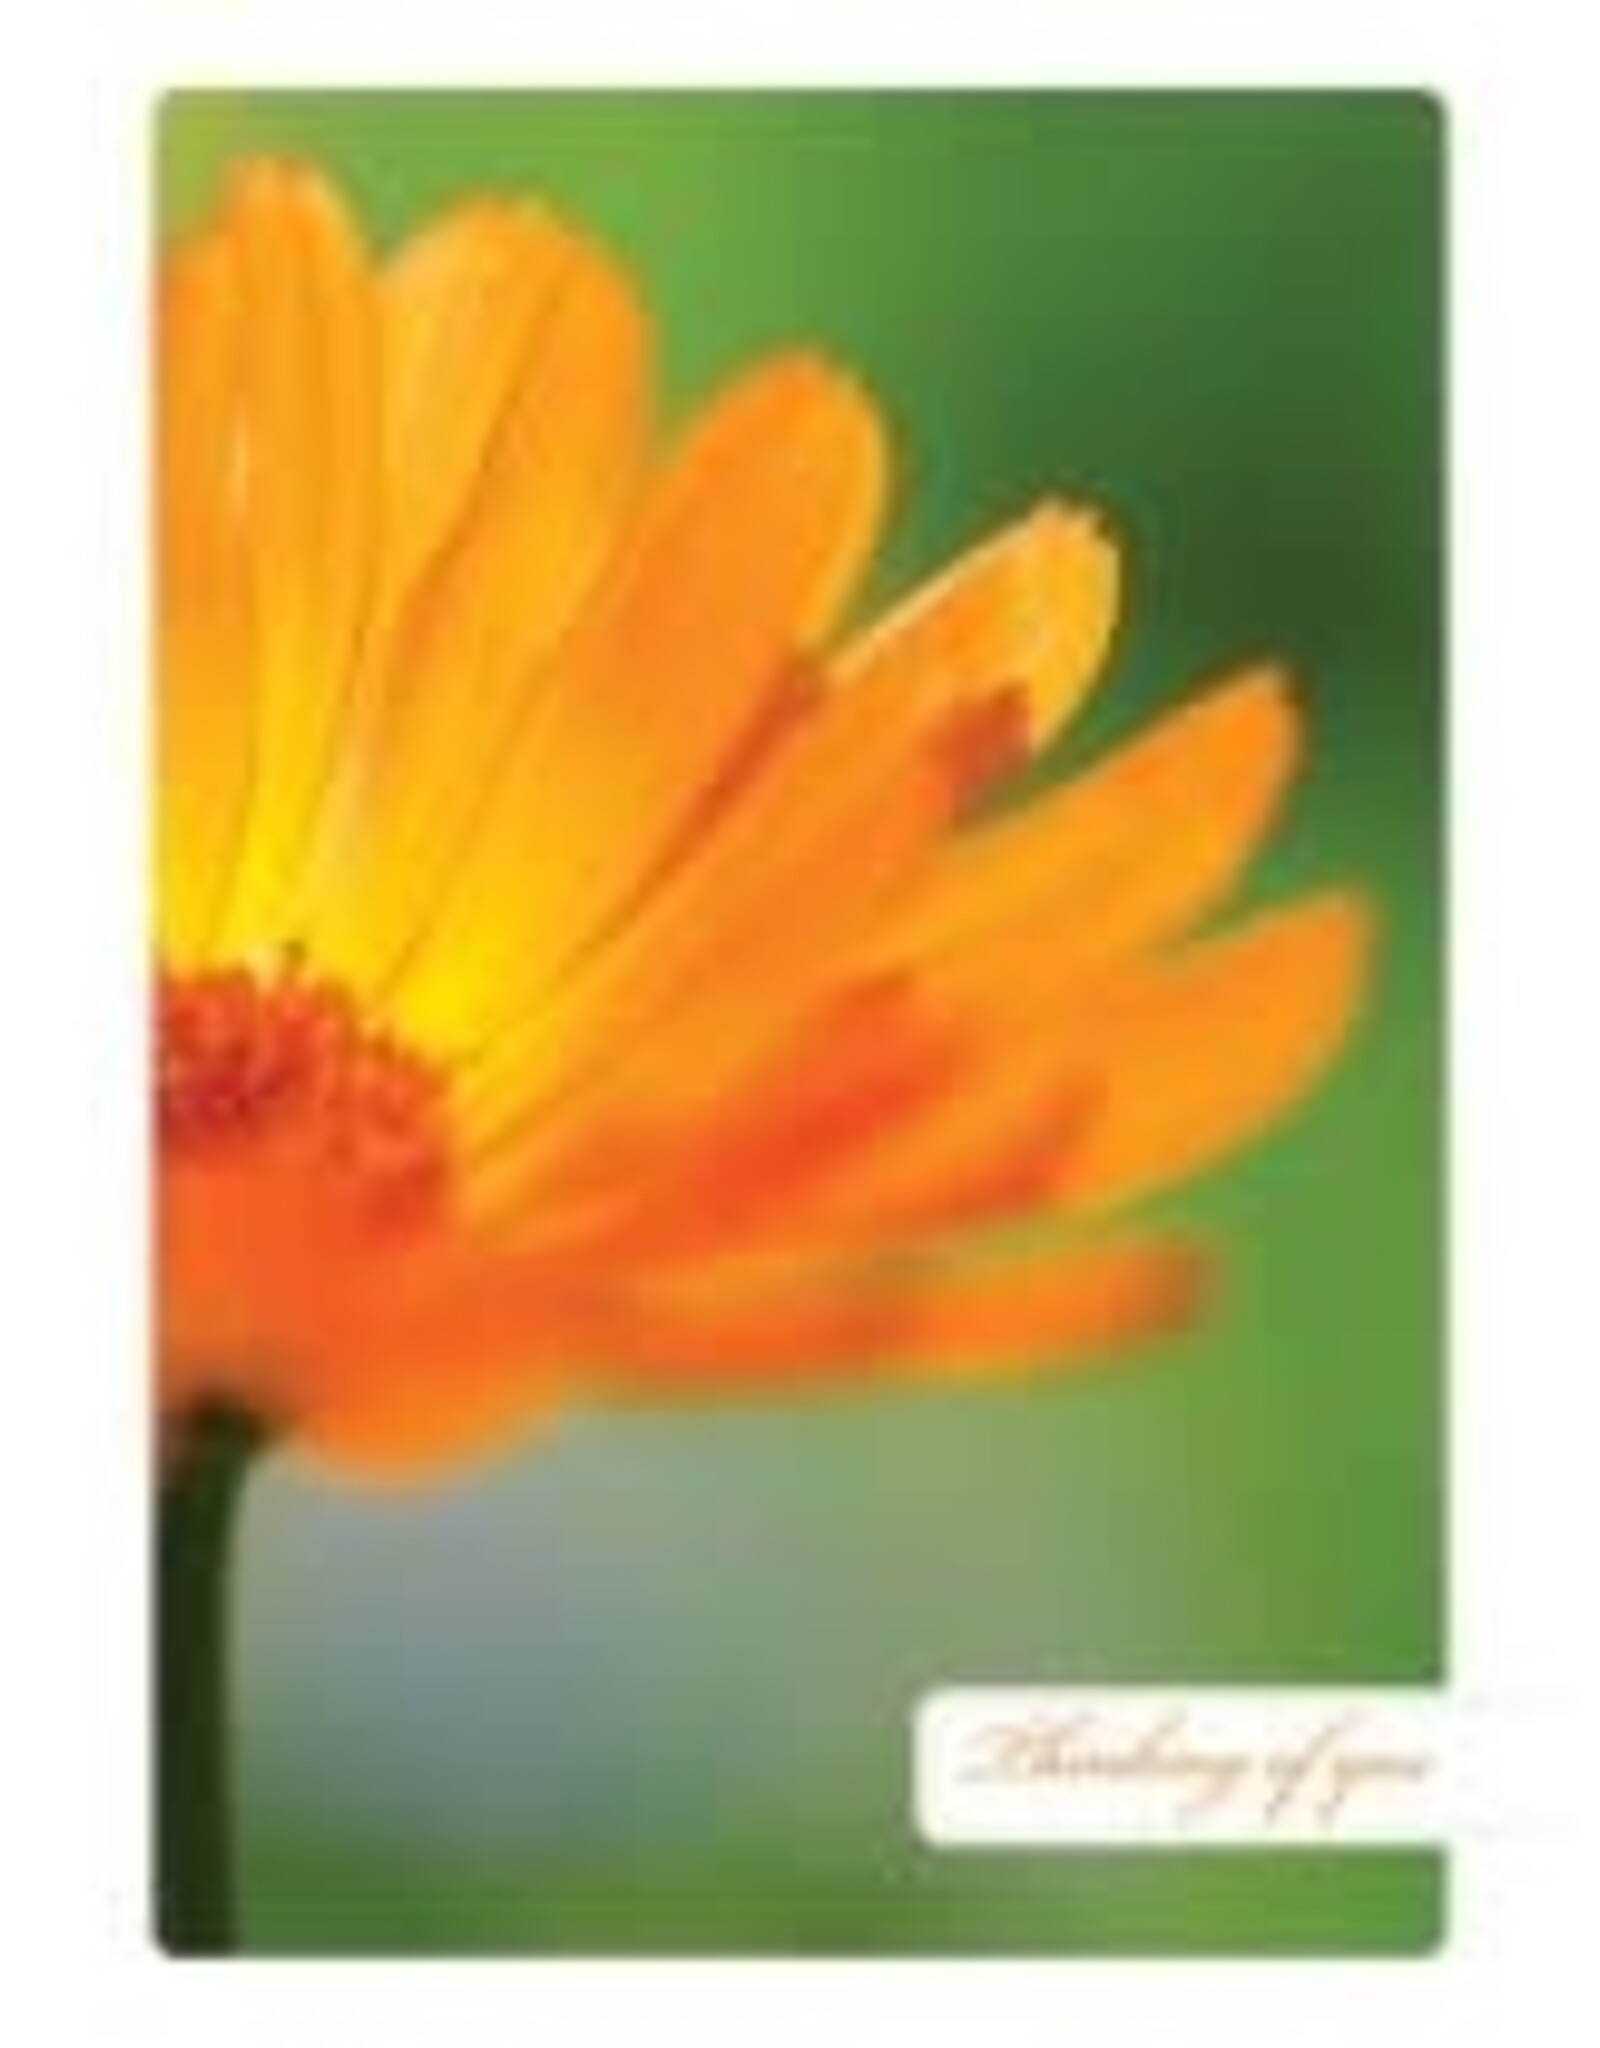 Tree - Free Greetings Bright Thoughts - Greeting Card